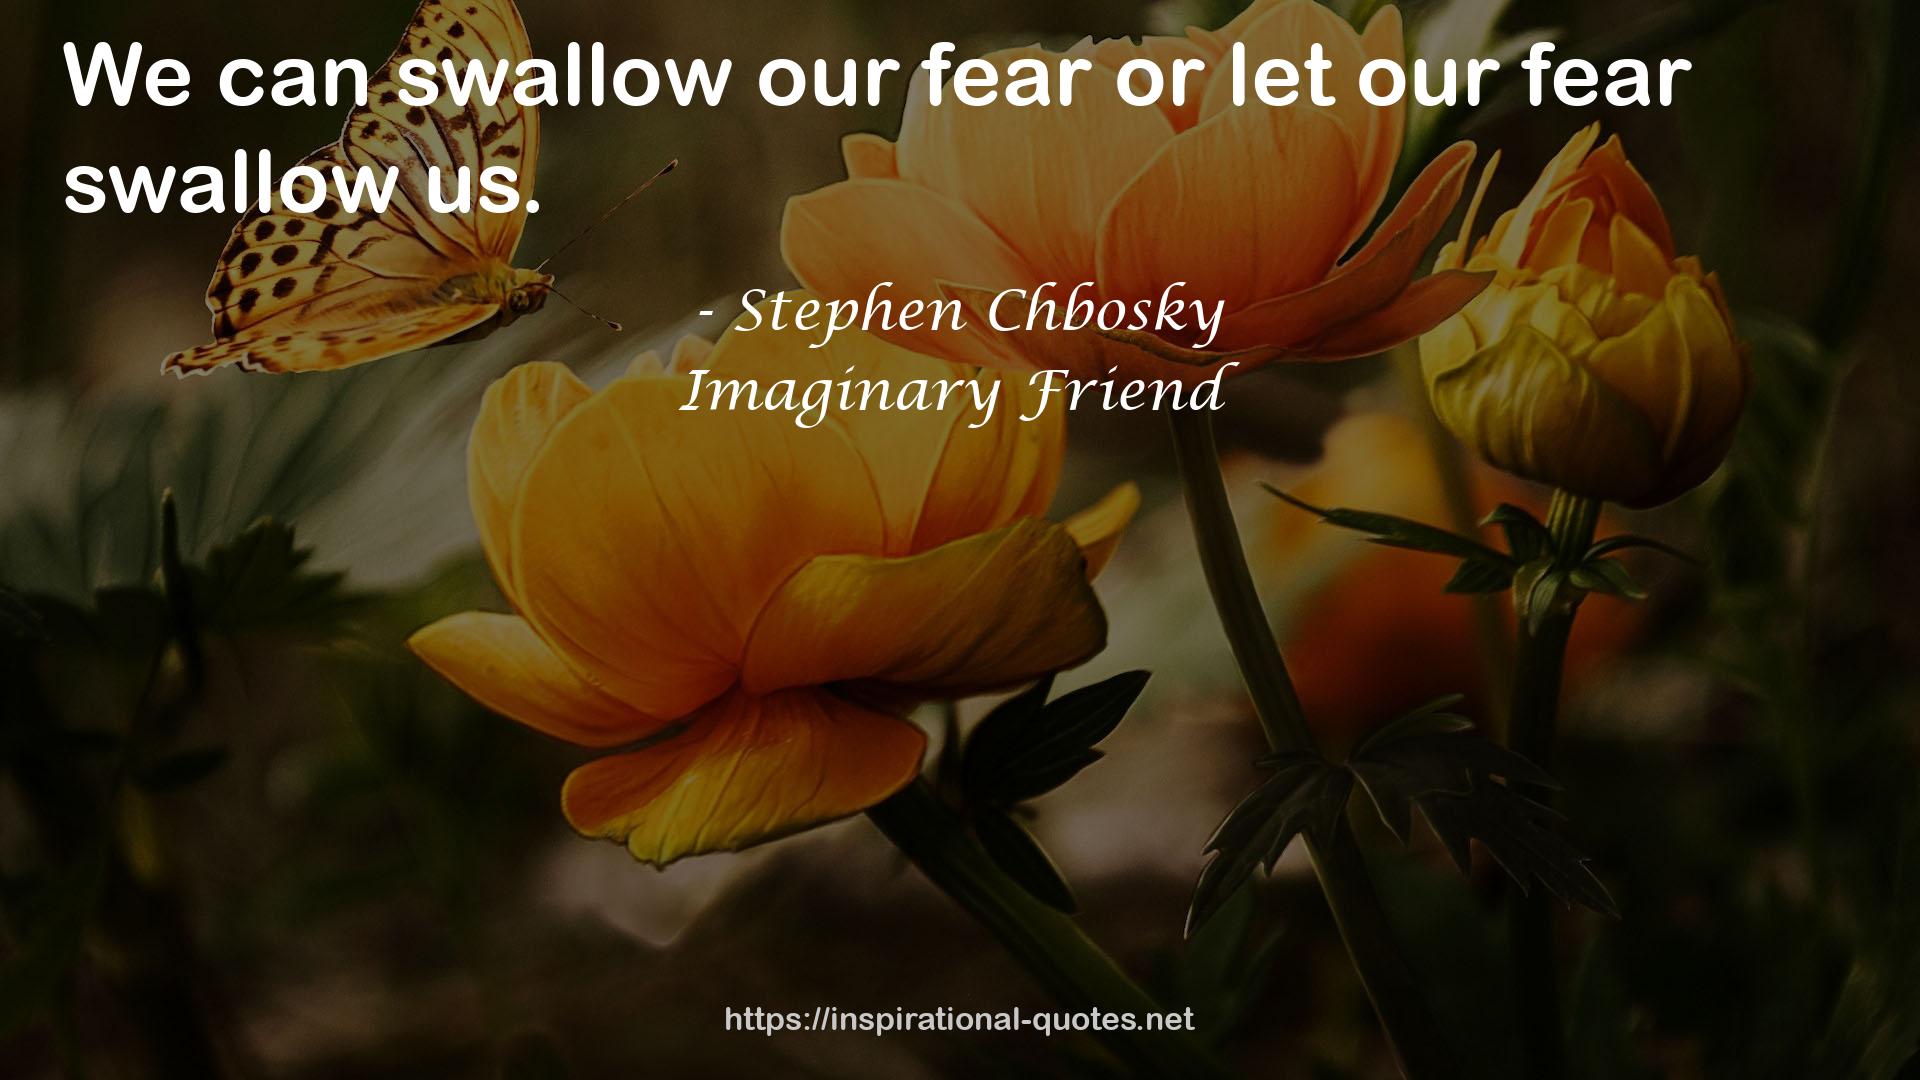 Imaginary Friend QUOTES